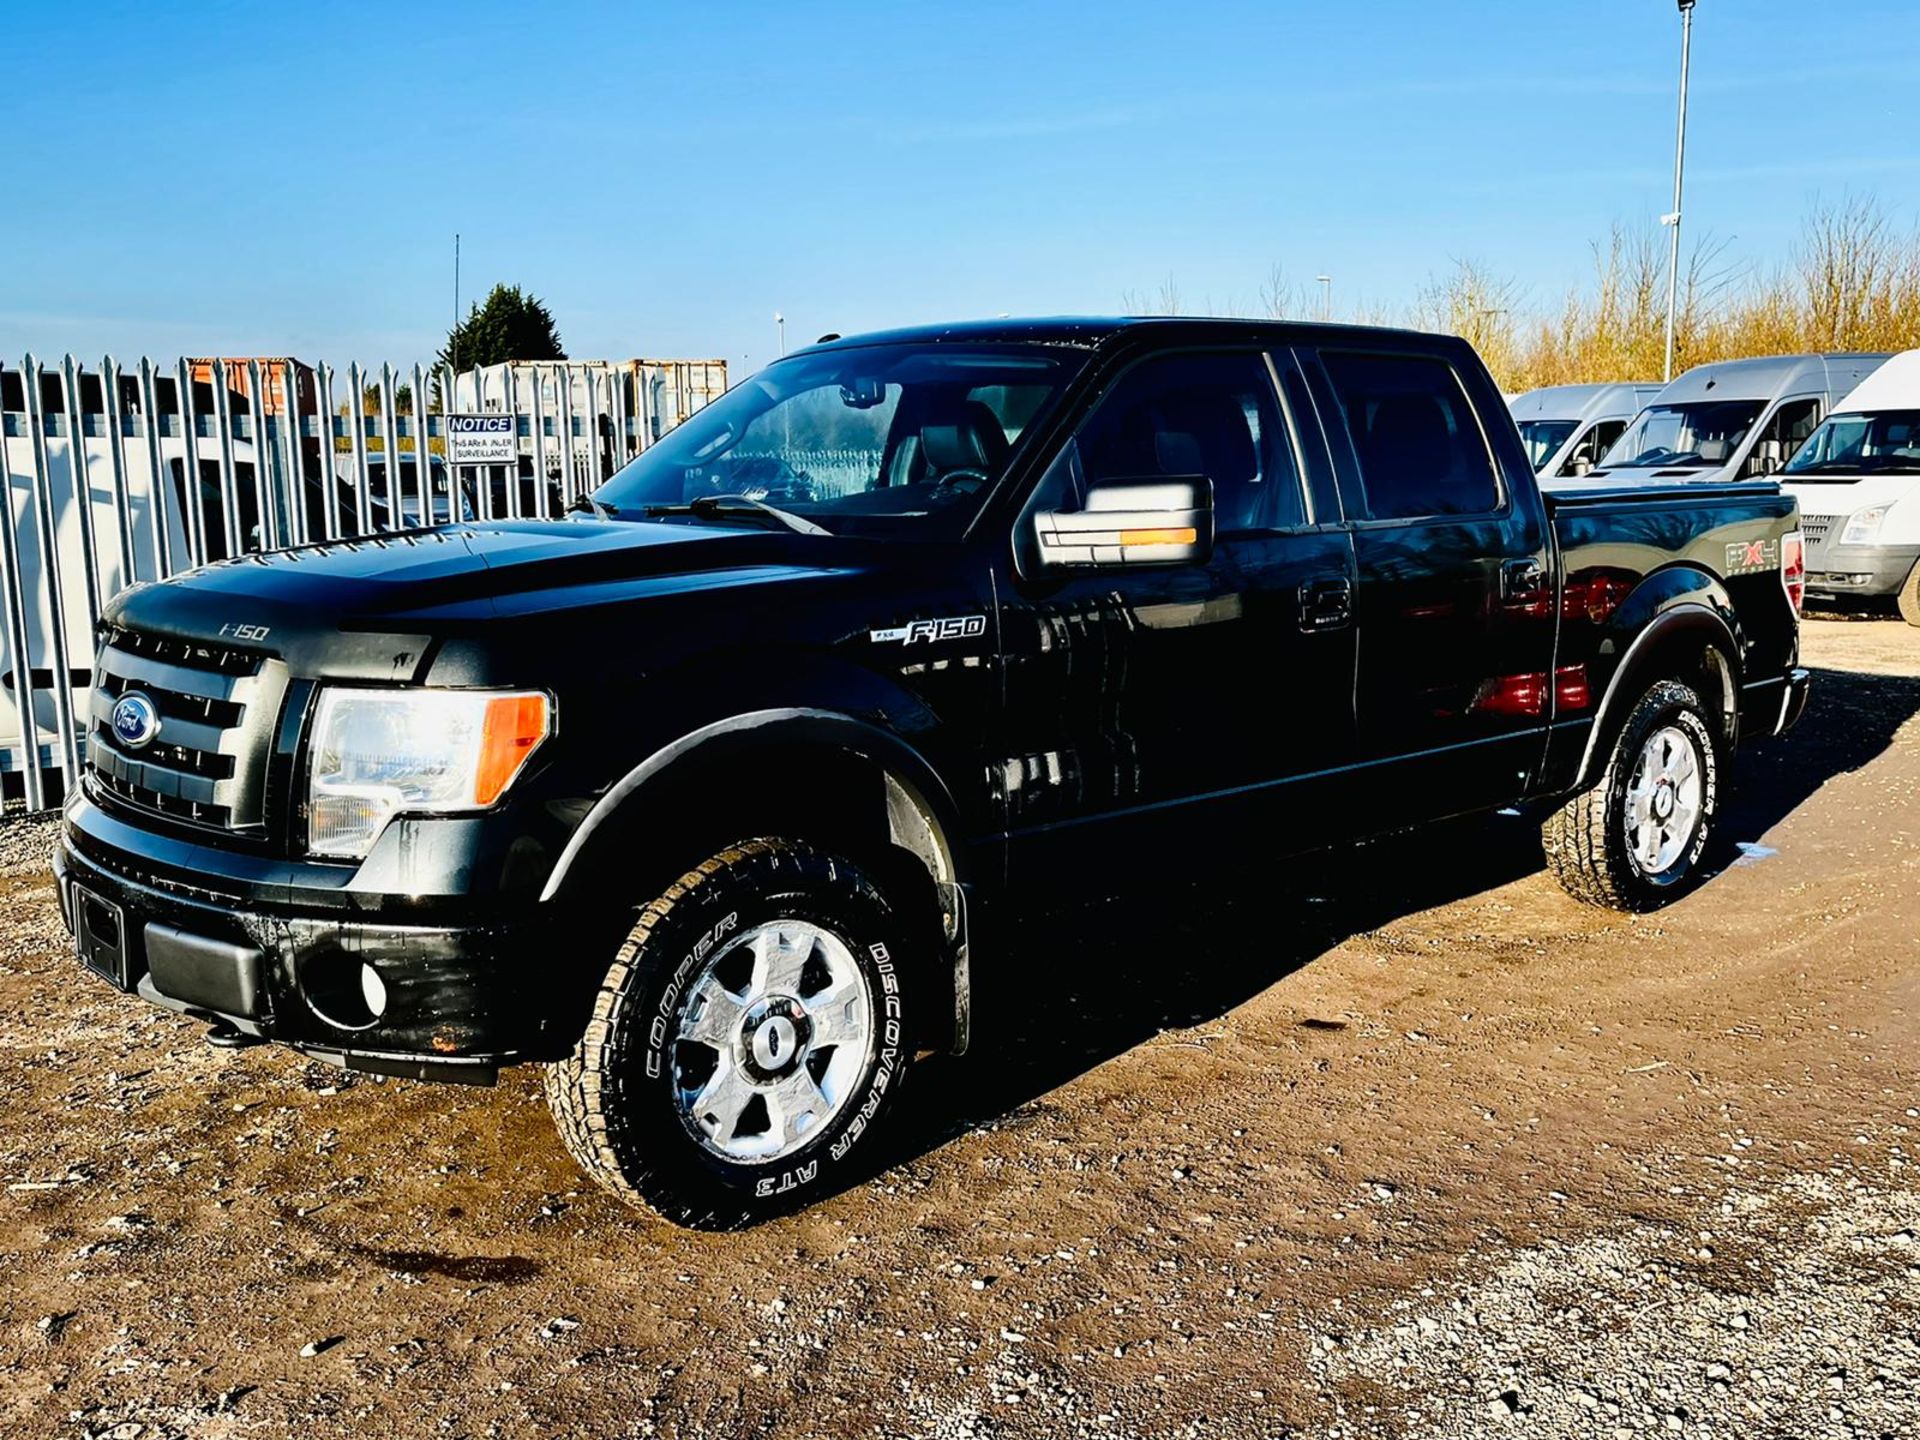 Ford F-150 5.4L V8 SuperCab 4WD FX4 Edition '2010 Year' Colour Coded Package - Top Spec - Image 11 of 44